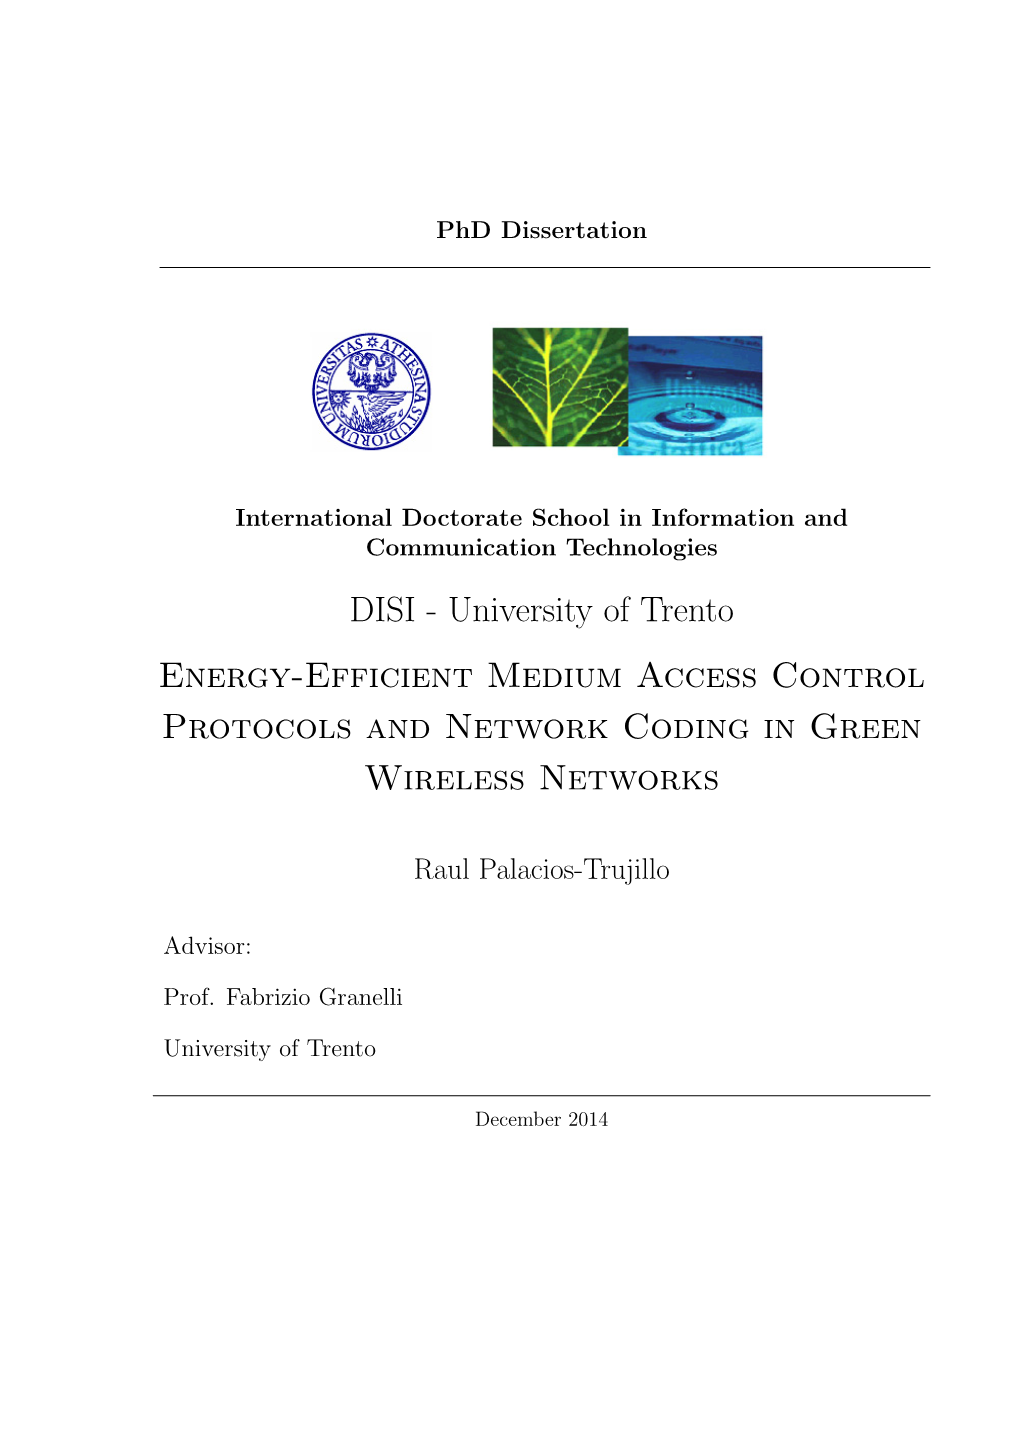 DISI - University of Trento Energy-Efficient Medium Access Control Protocols and Network Coding in Green Wireless Networks